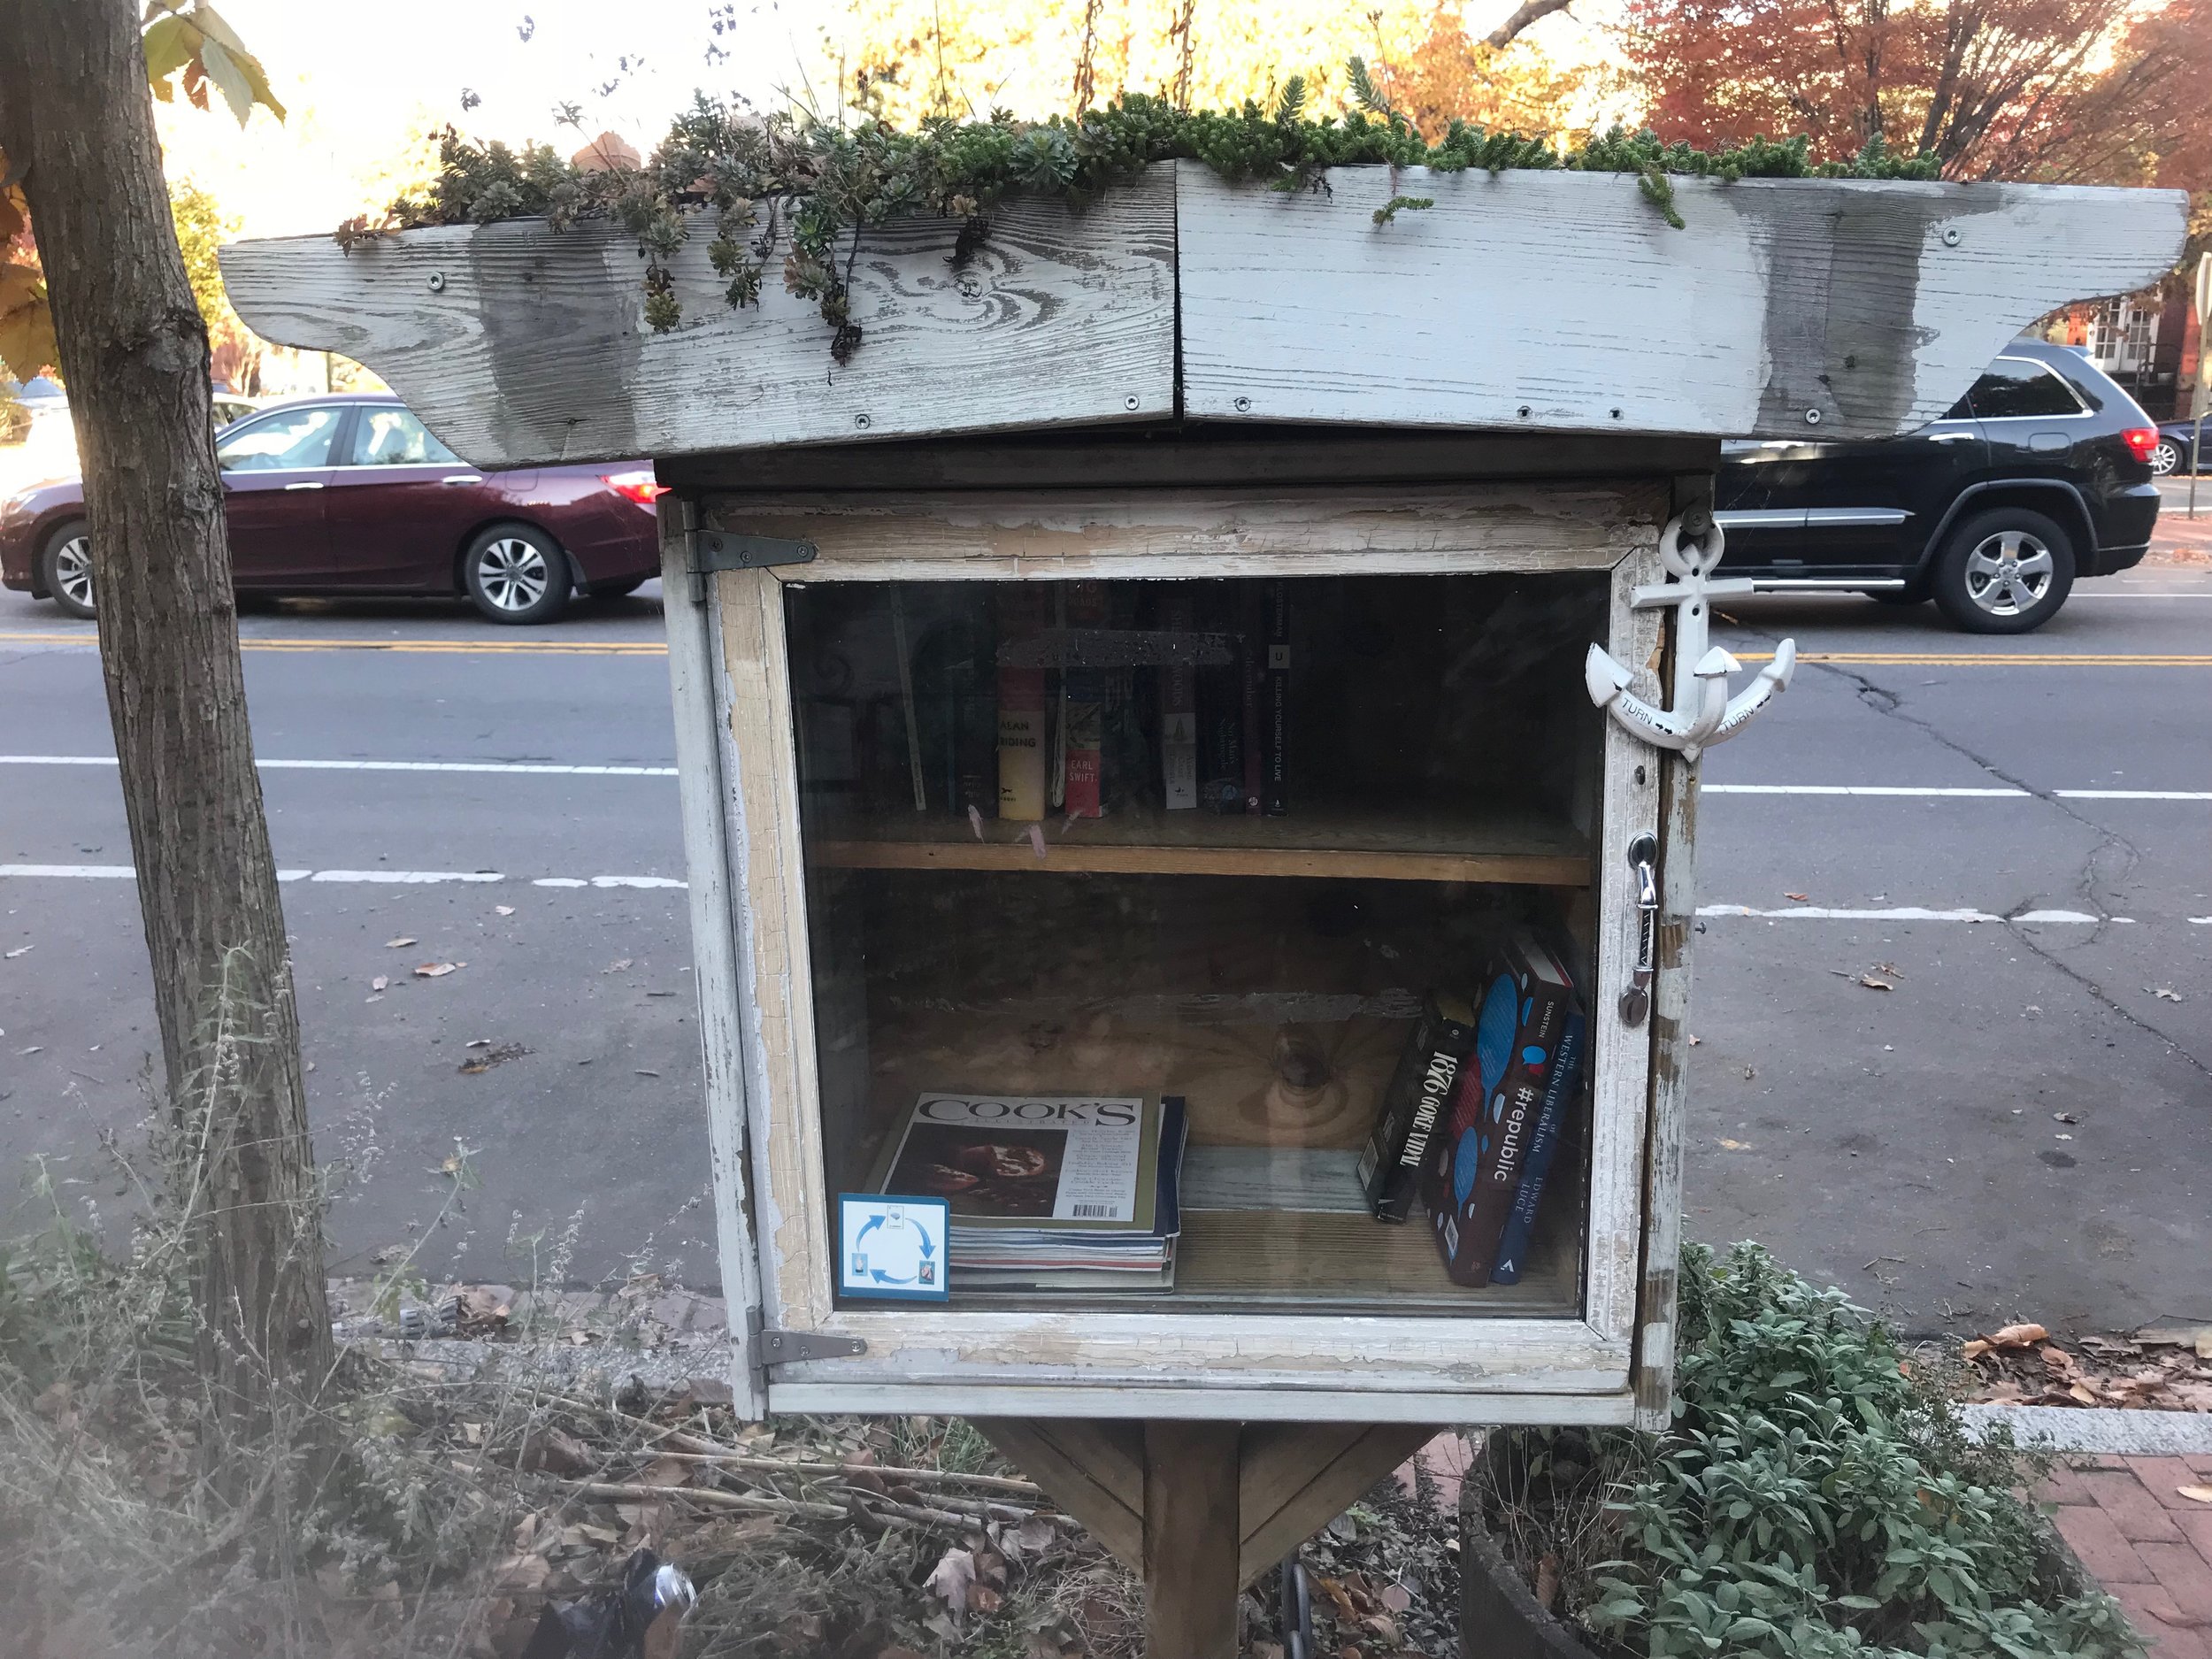  A Little Free Library box in Washington, DC 